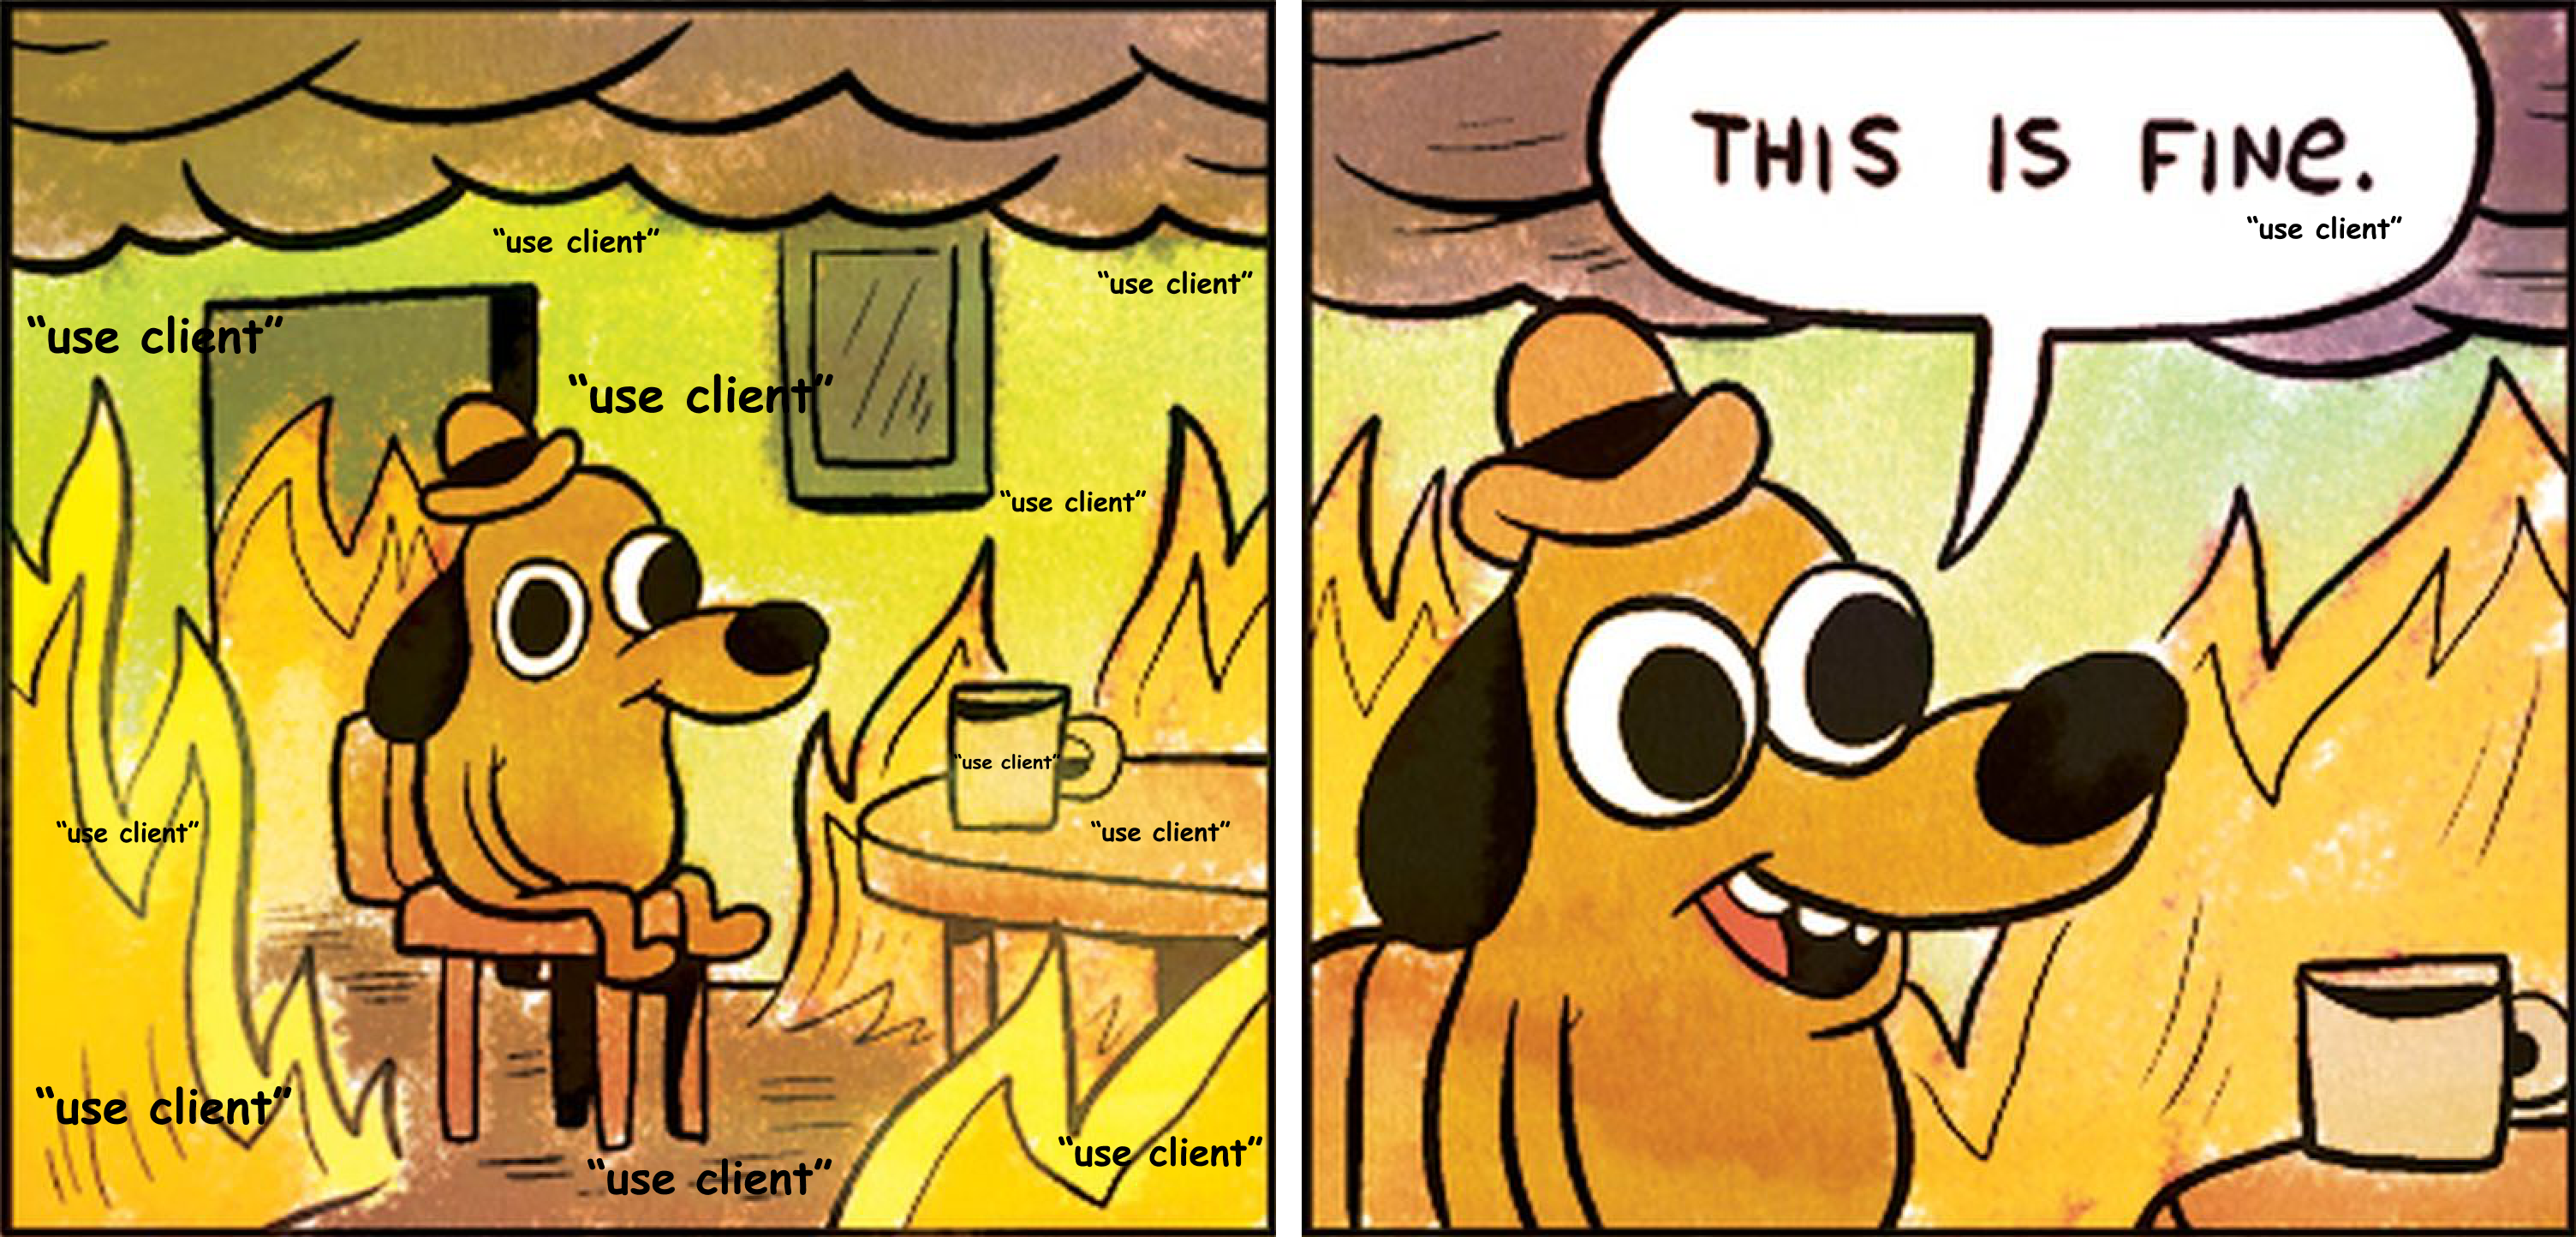 "use client" is fine dog